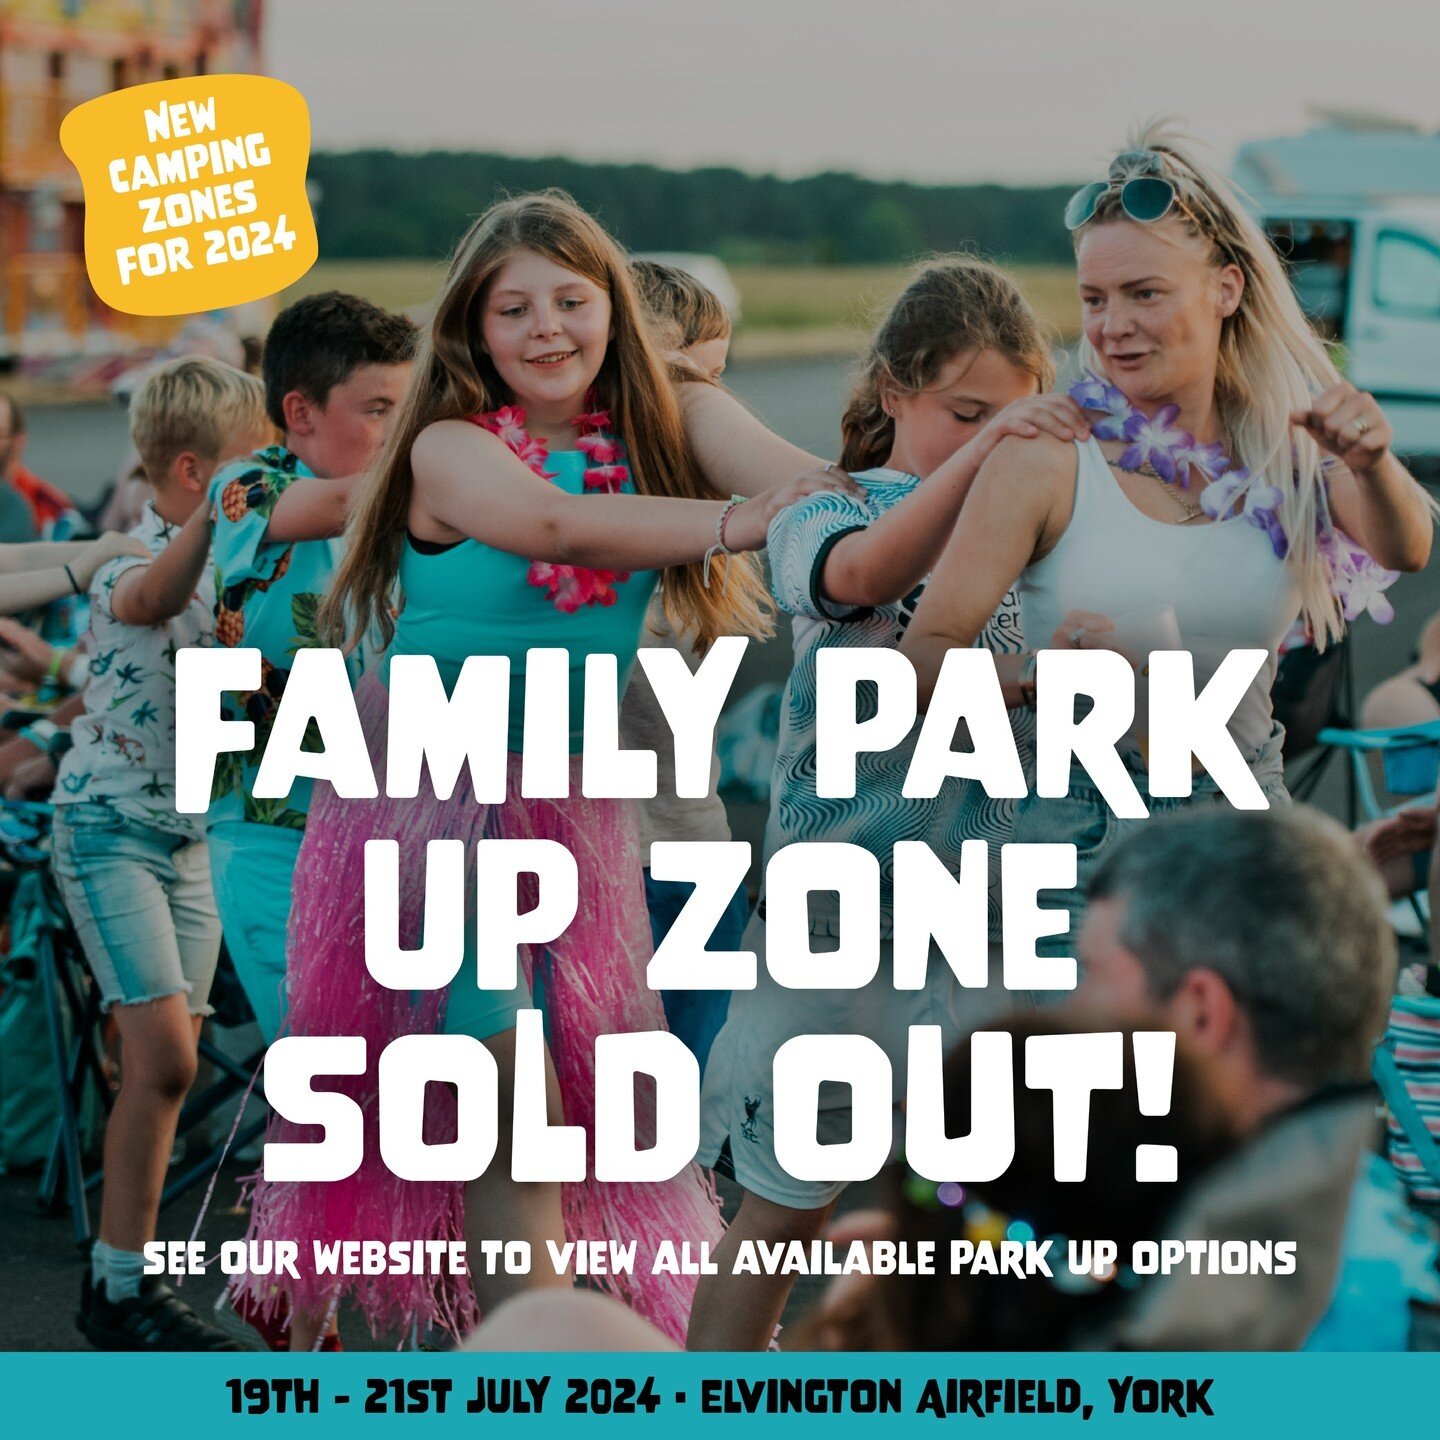 Family Zone tickets for Vanlove Fest are officially SOLD OUT! Thank you to everyone who secured their spot for a fantastic family experience, it&rsquo;s going to be van-tastic 😏

Stay tuned for more updates and announcements as we prepare for an unf